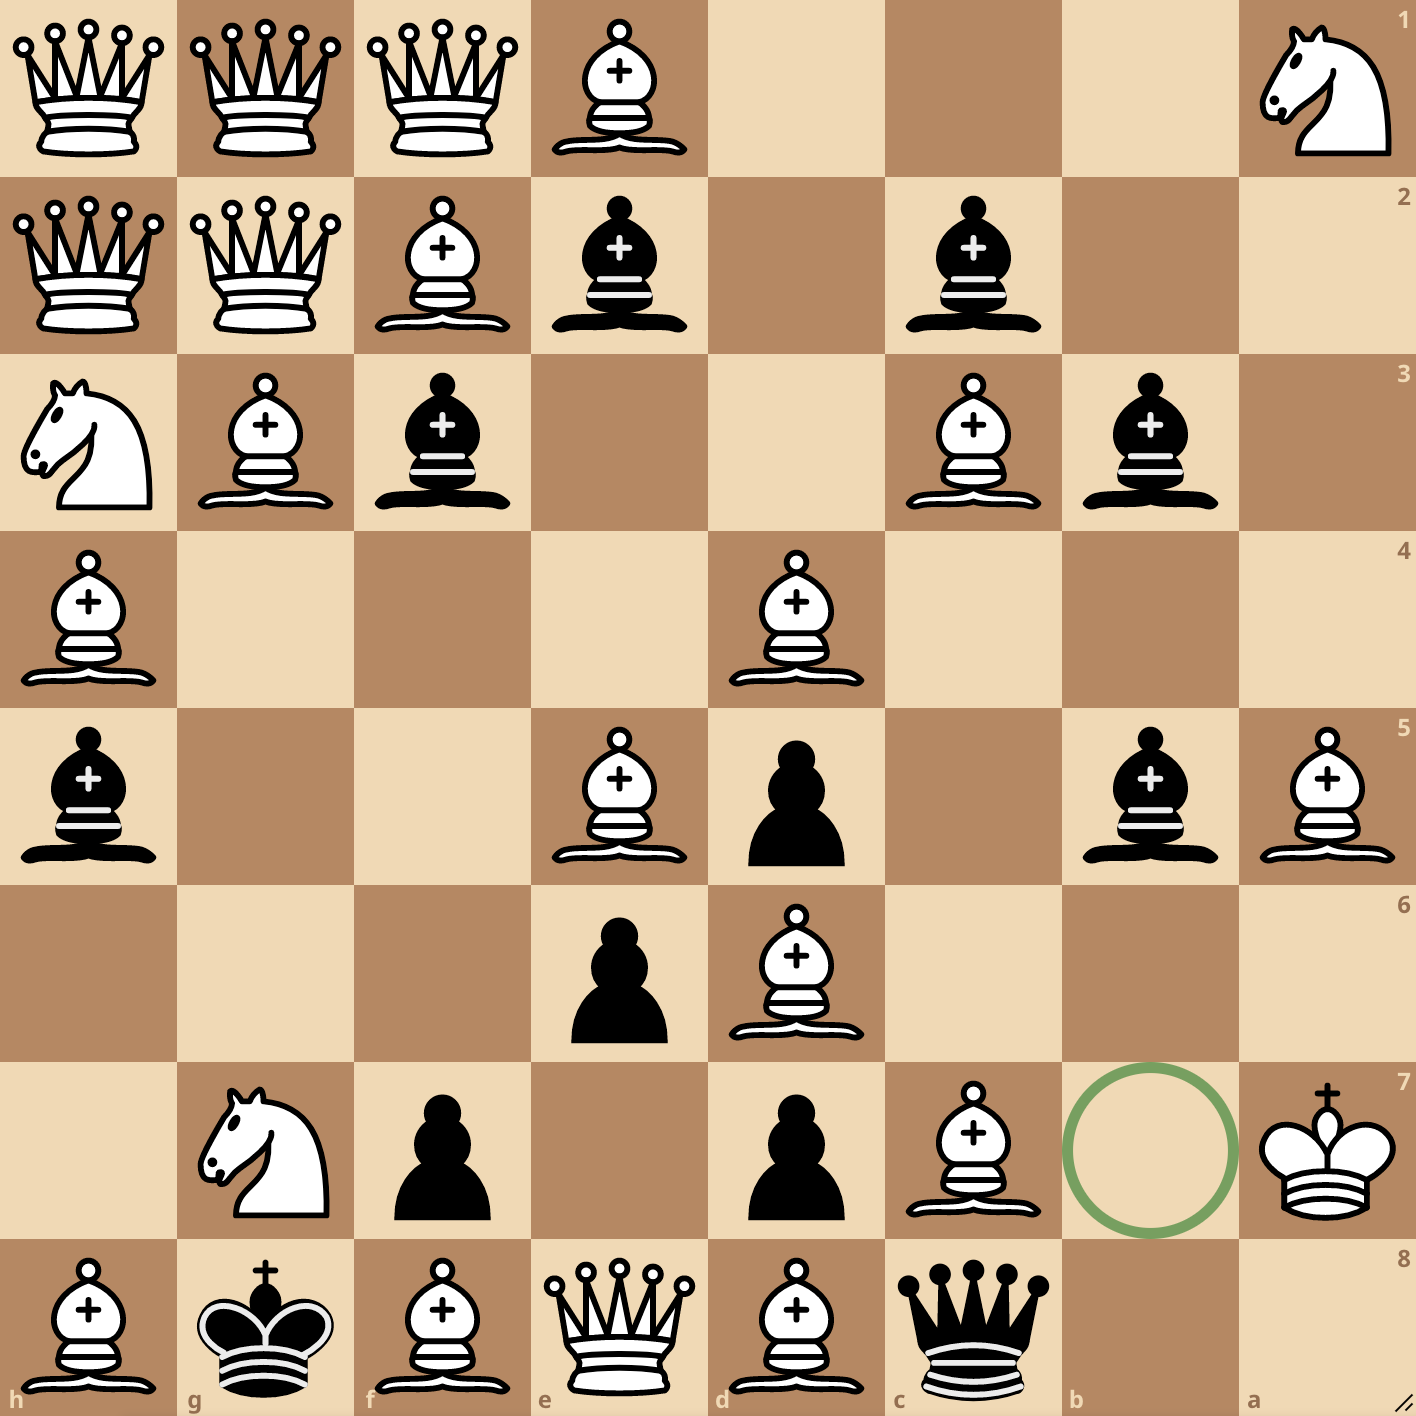 A chess board with a1 at the top right. A green circle marks b7. The board's FEN is below.